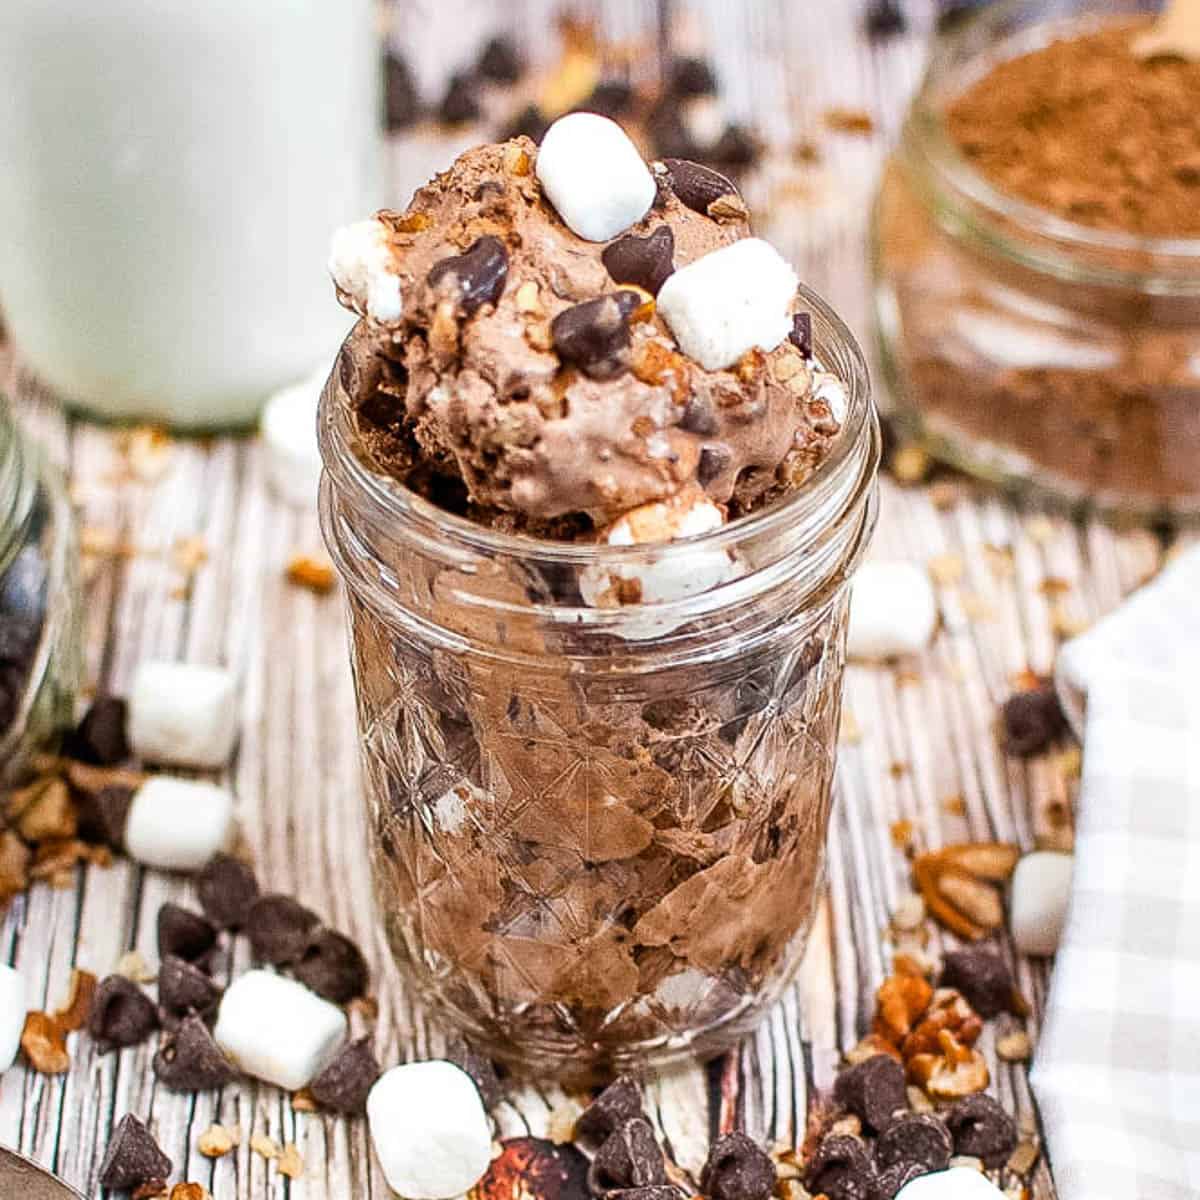 Close-up, low angle shot of a jar with rocky road ice cream in it.